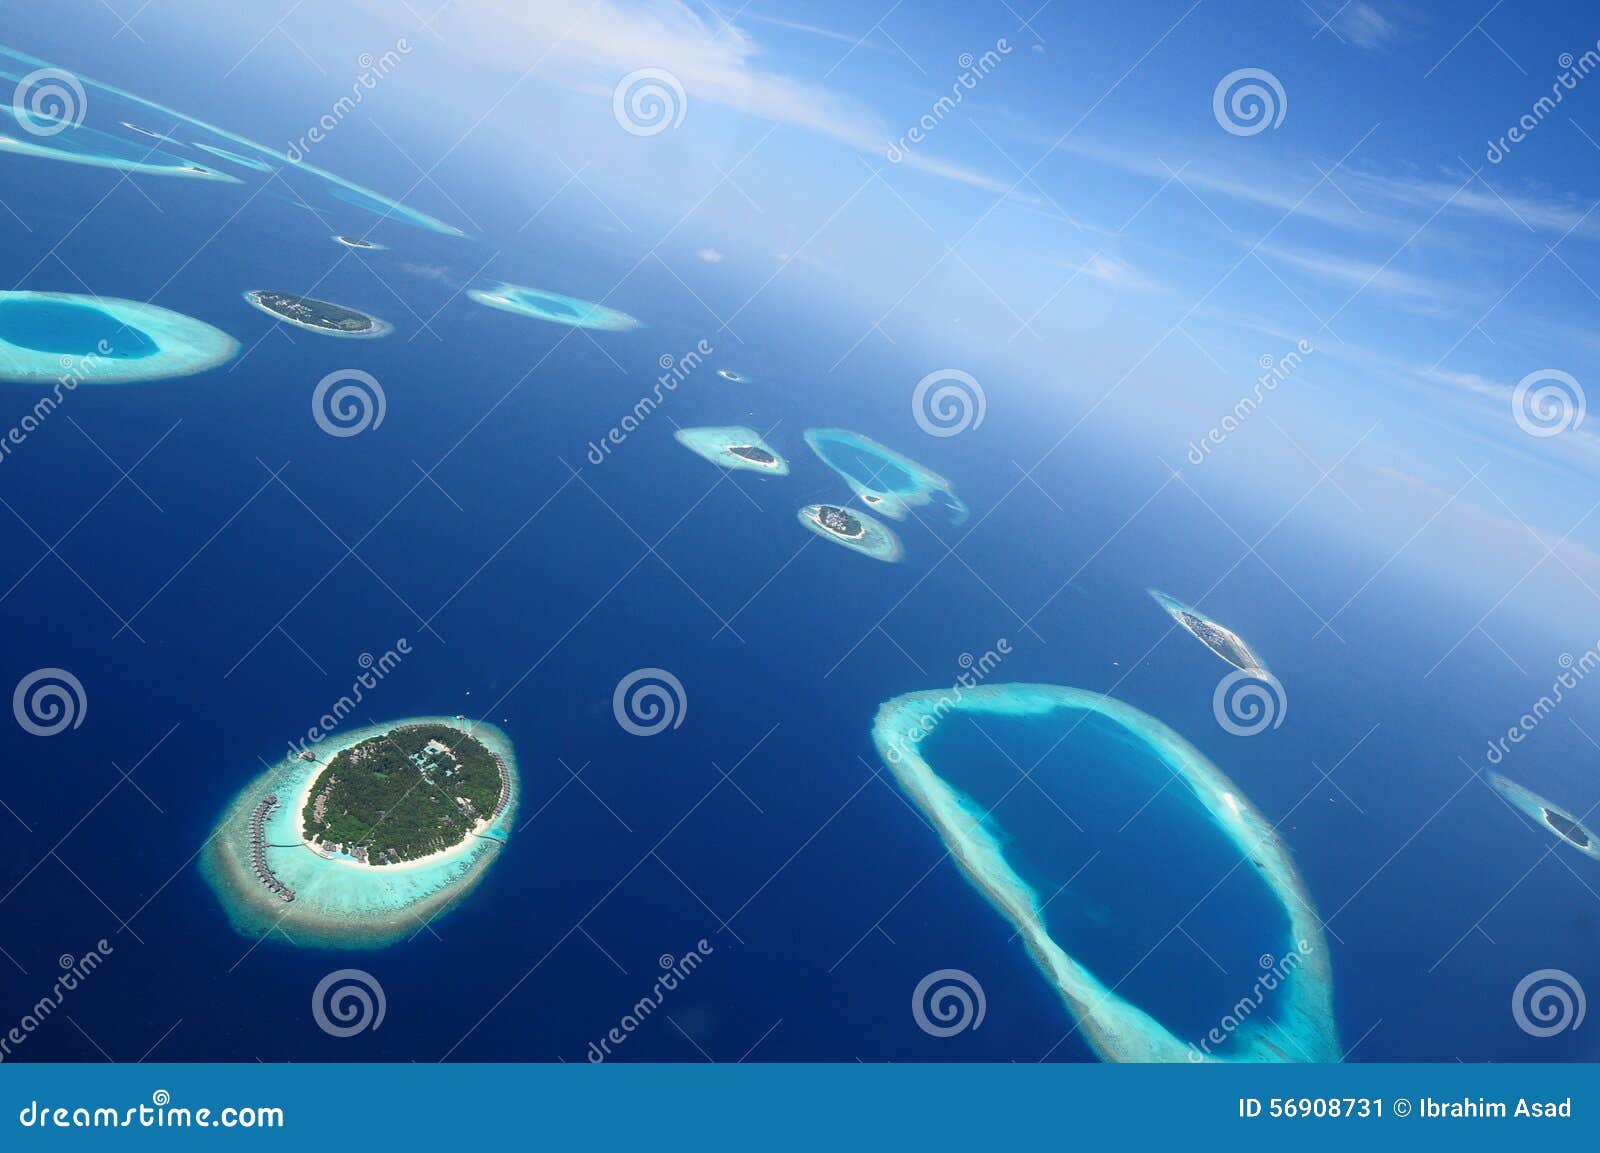 addu atoll or the seenu atoll, the south most atoll of the maldives islands